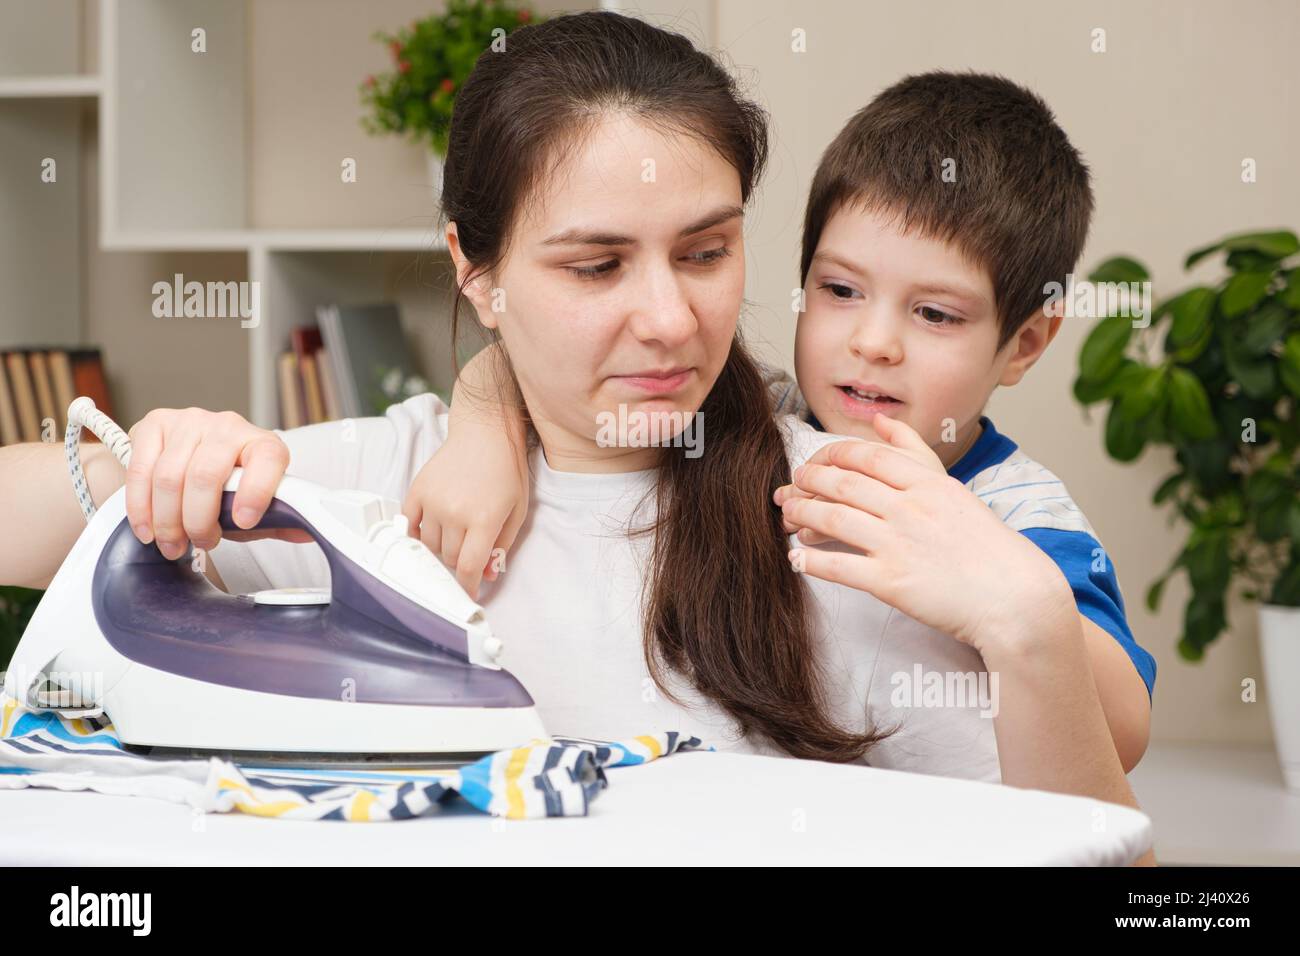 A small child of 4 years prevents his mother from ironing clothes. The difficulties of motherhood. Stock Photo